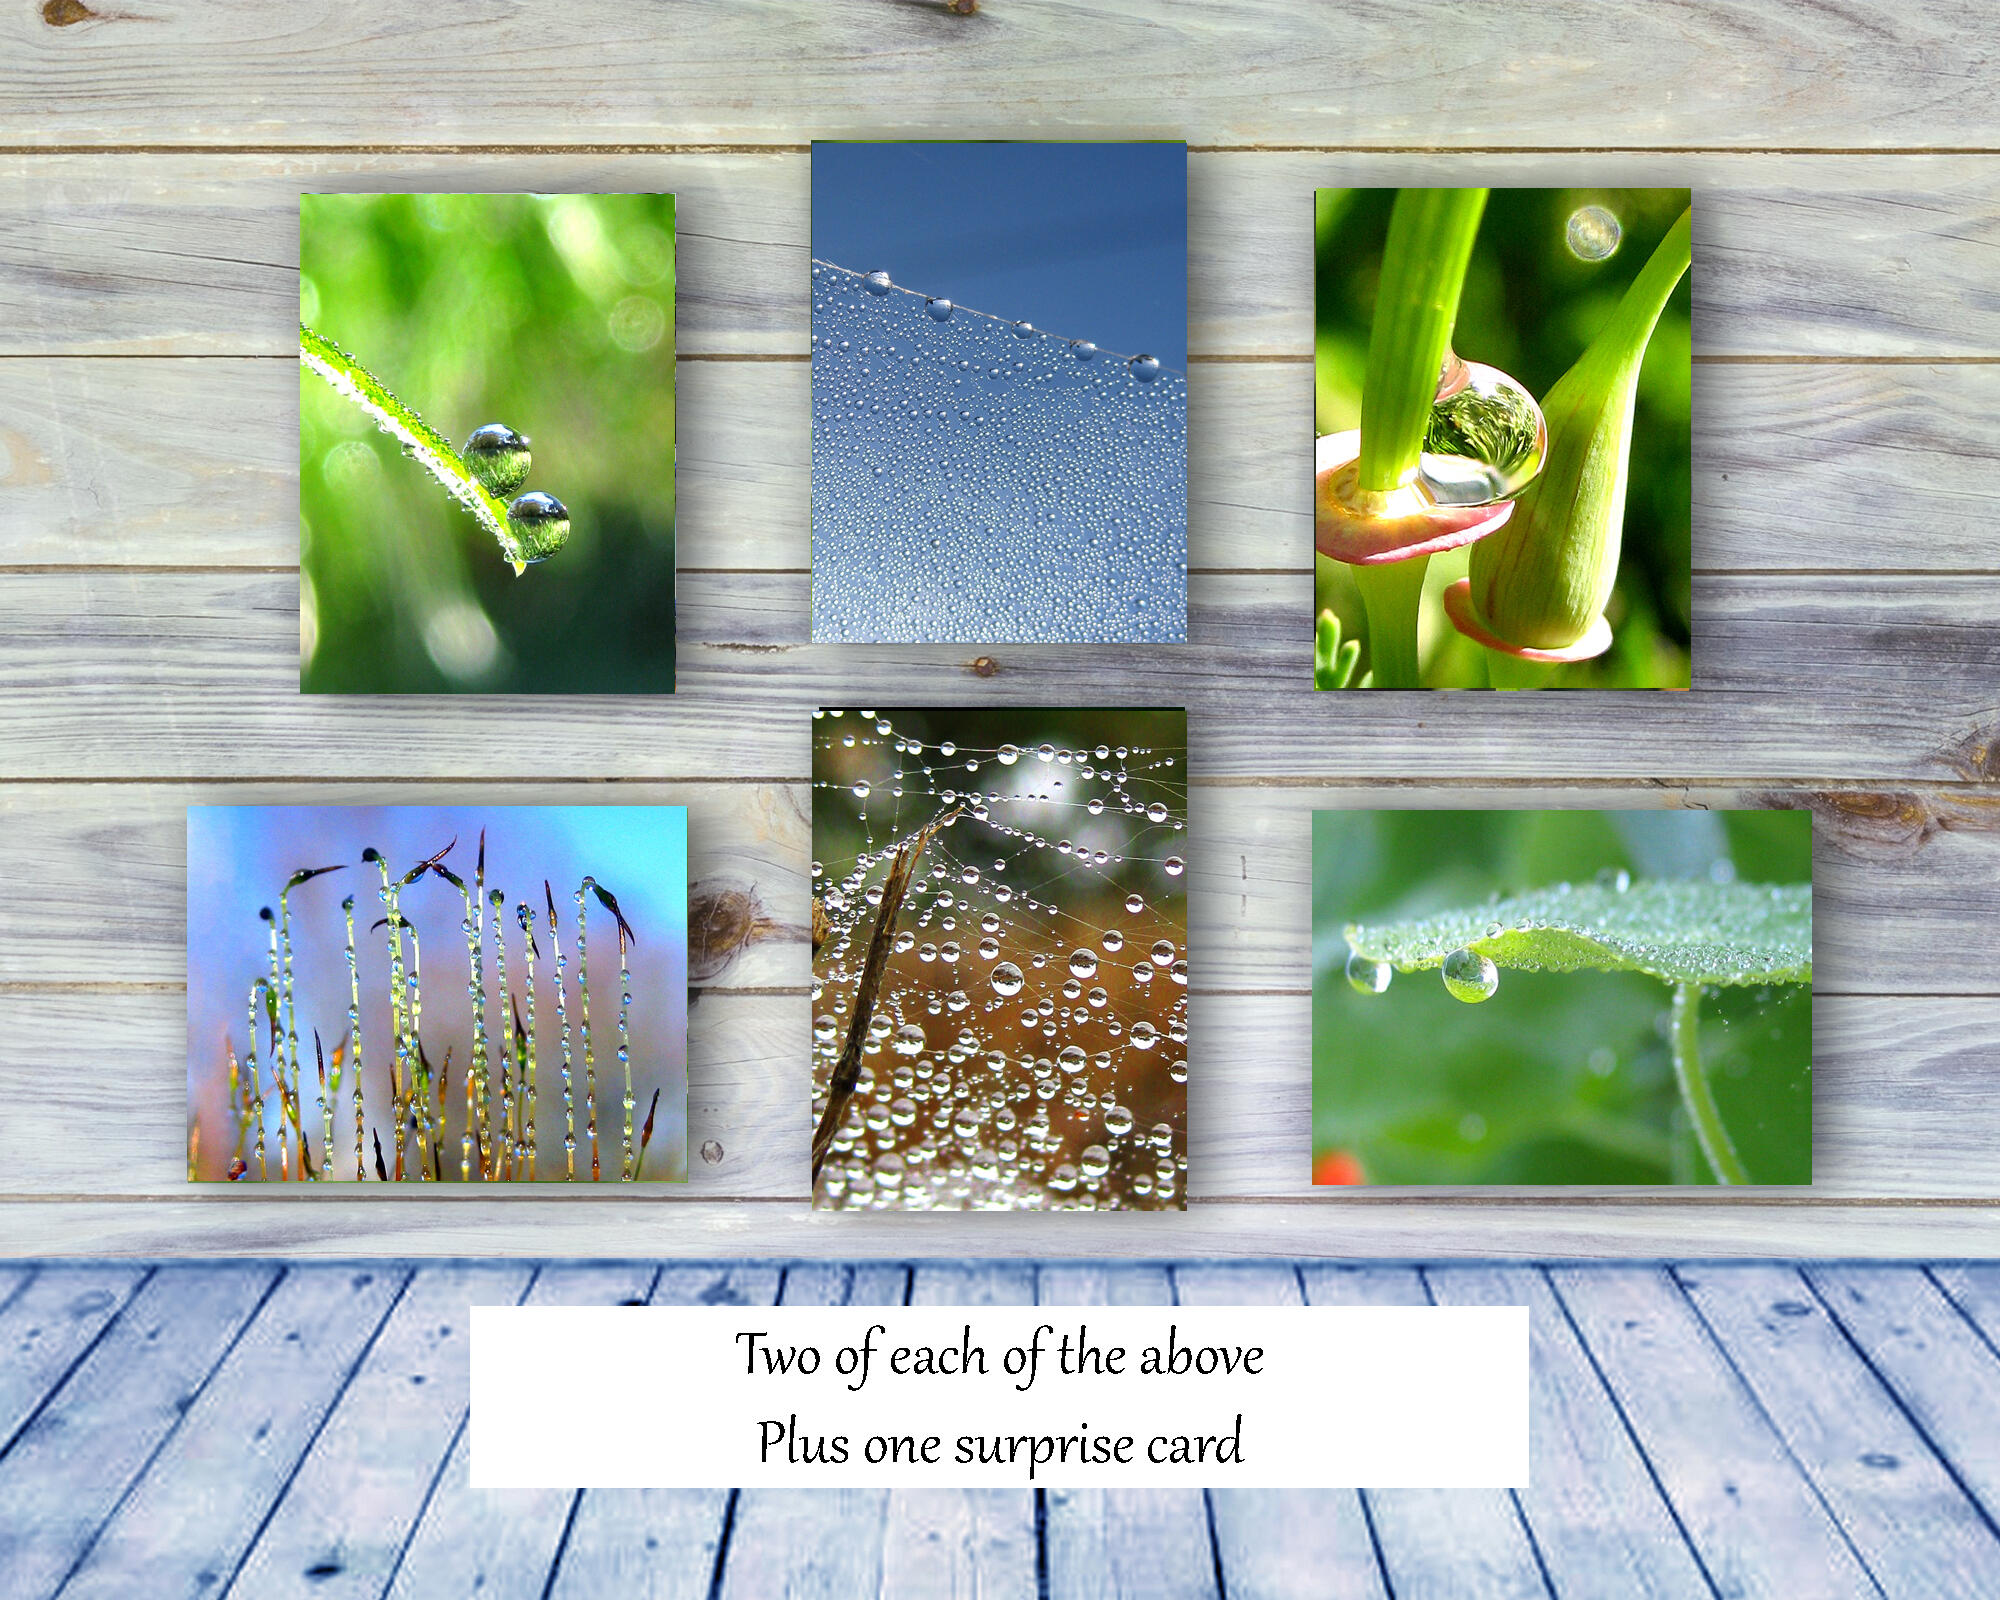 Dew Drops II - Colorful, botanical, greeting card collection by The Poetry of Nature, Stories in nature photo cards with poems. Boxed Set Baker's Dozen